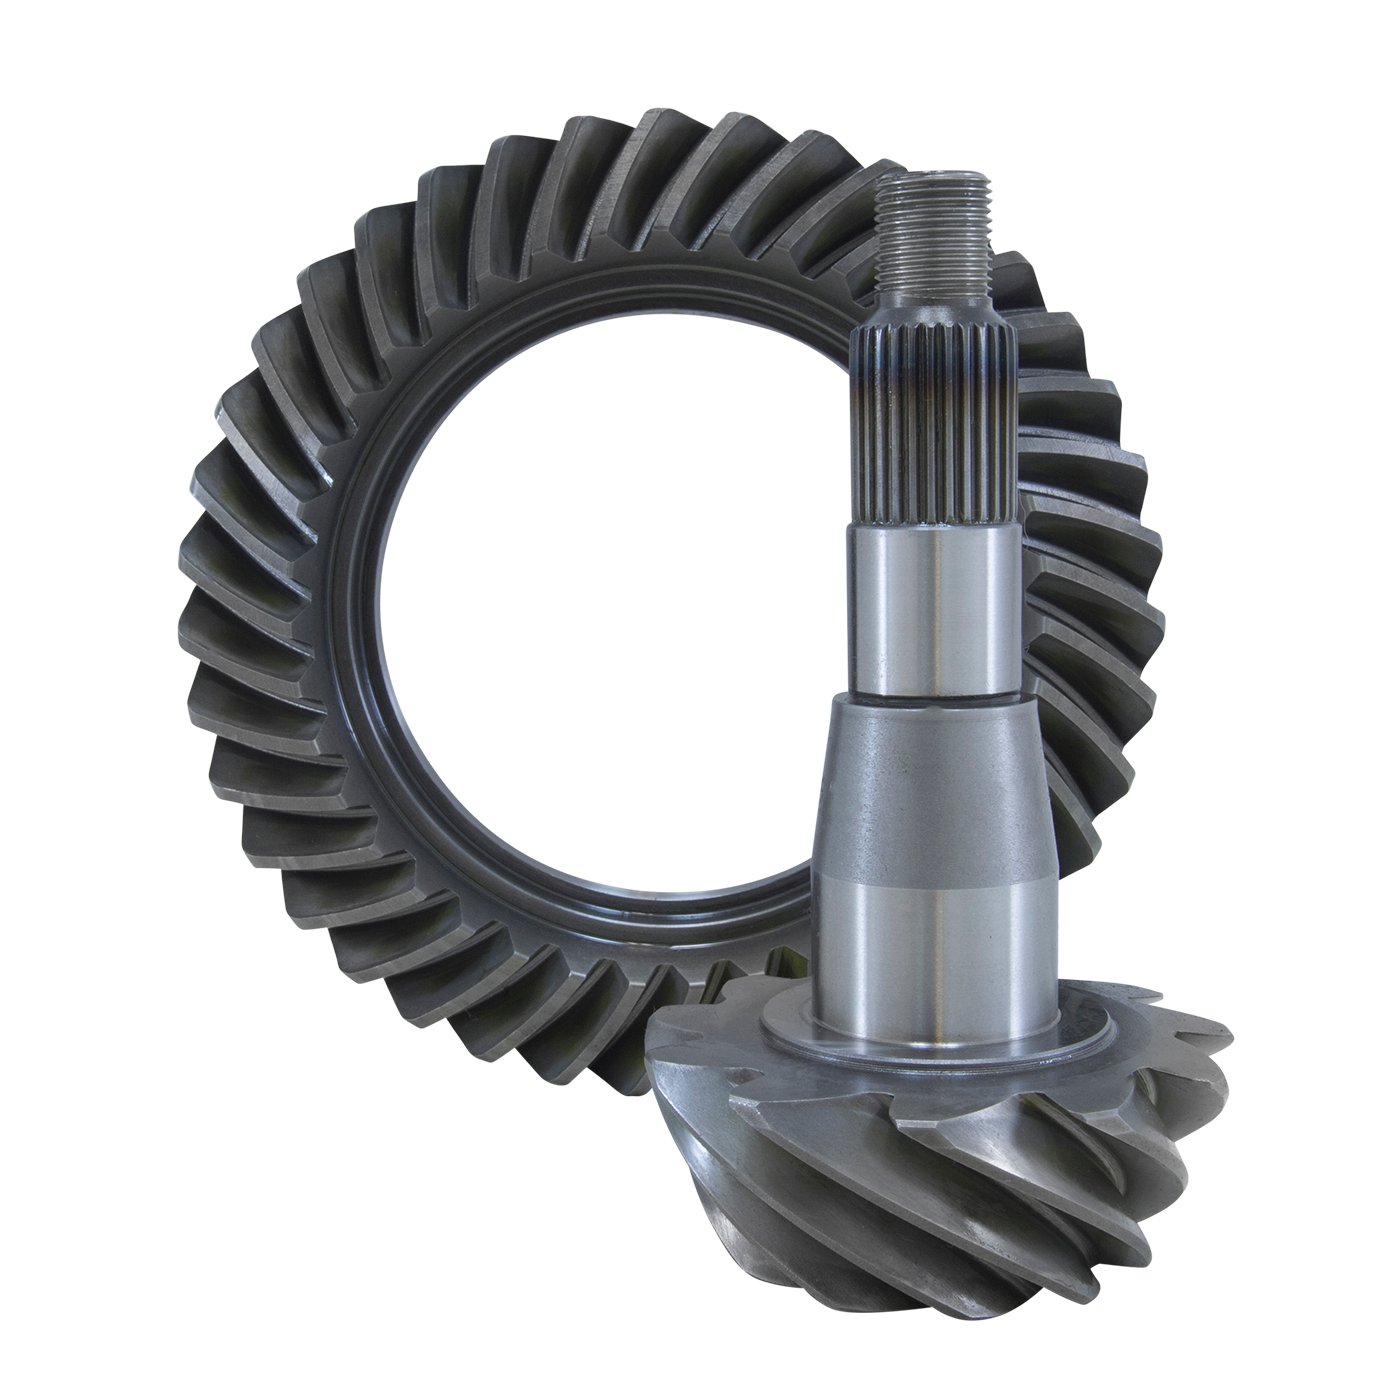 USA Standard 36419 Ring & Pinion Gear Set, For '11 & Up Chrysler 9.25 Zf, 3.21 Ratio